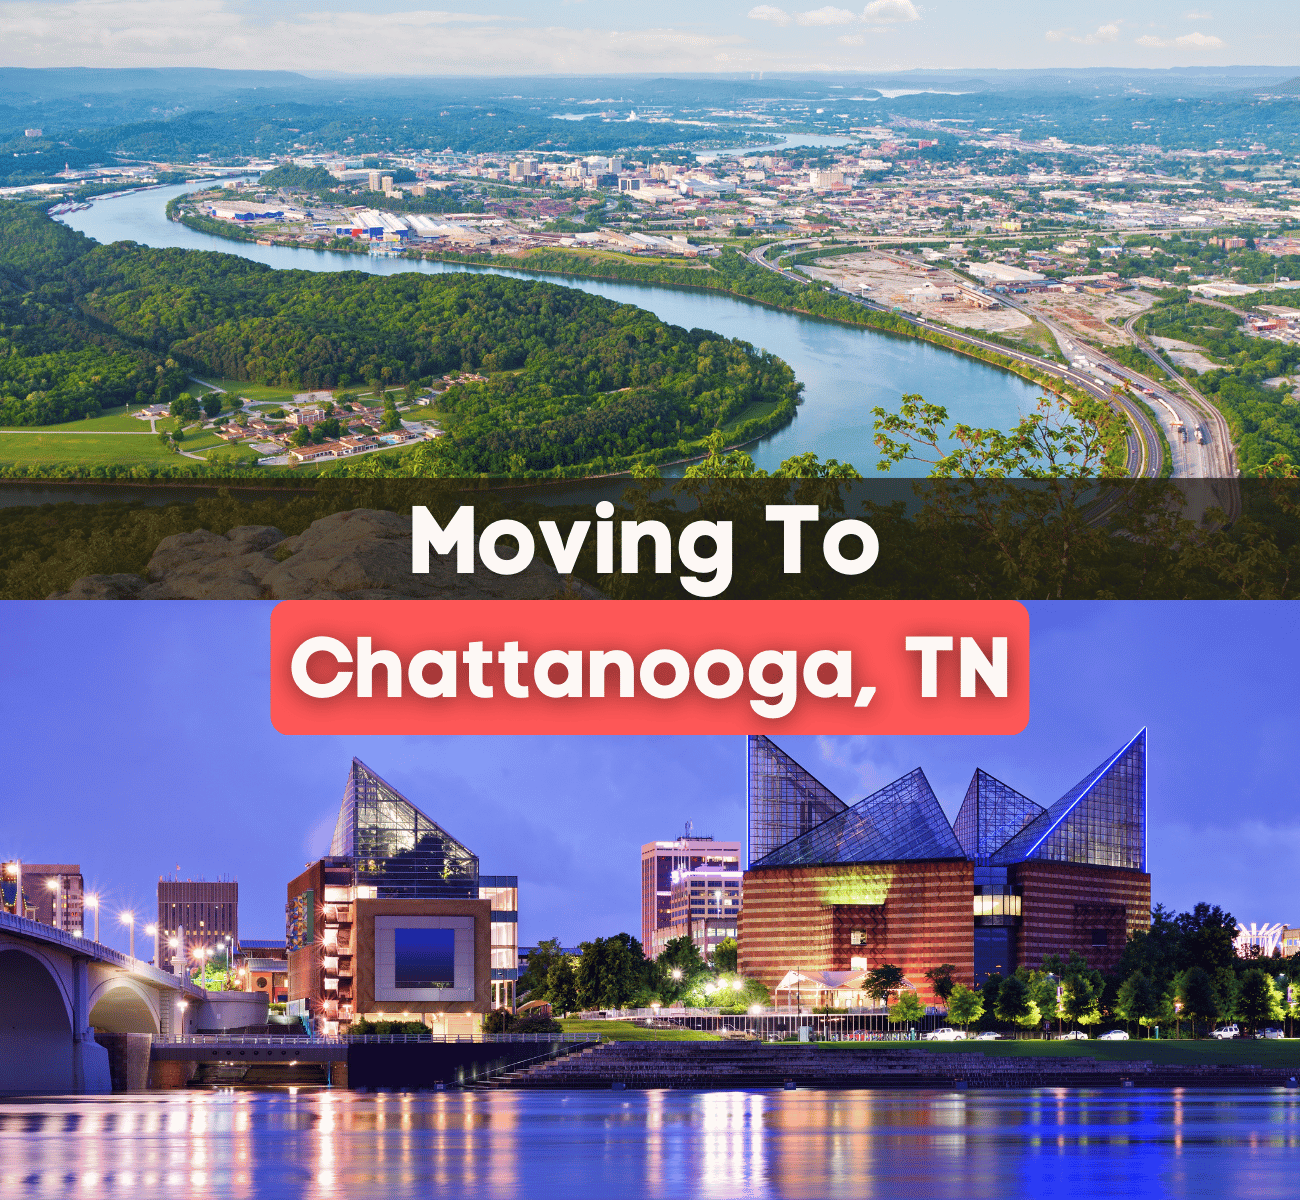 moving to Chattanooga, TN graphic - Chattanooga at night and city view from Lookout Mountain